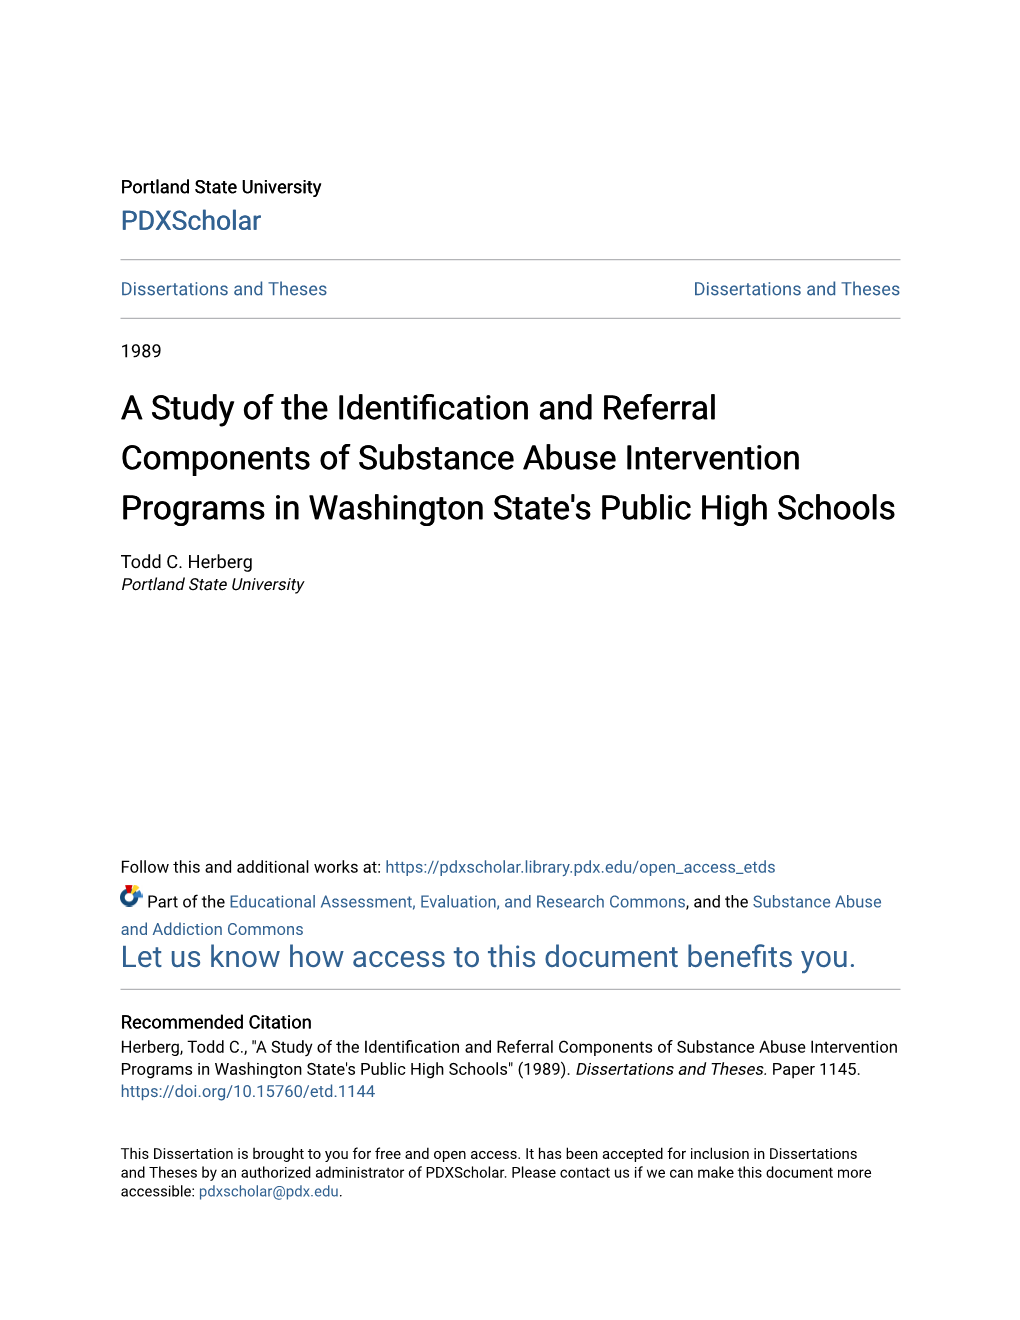 A Study of the Identification and Referral Components of Substance Abuse Intervention Programs in Washington State's Public High Schools